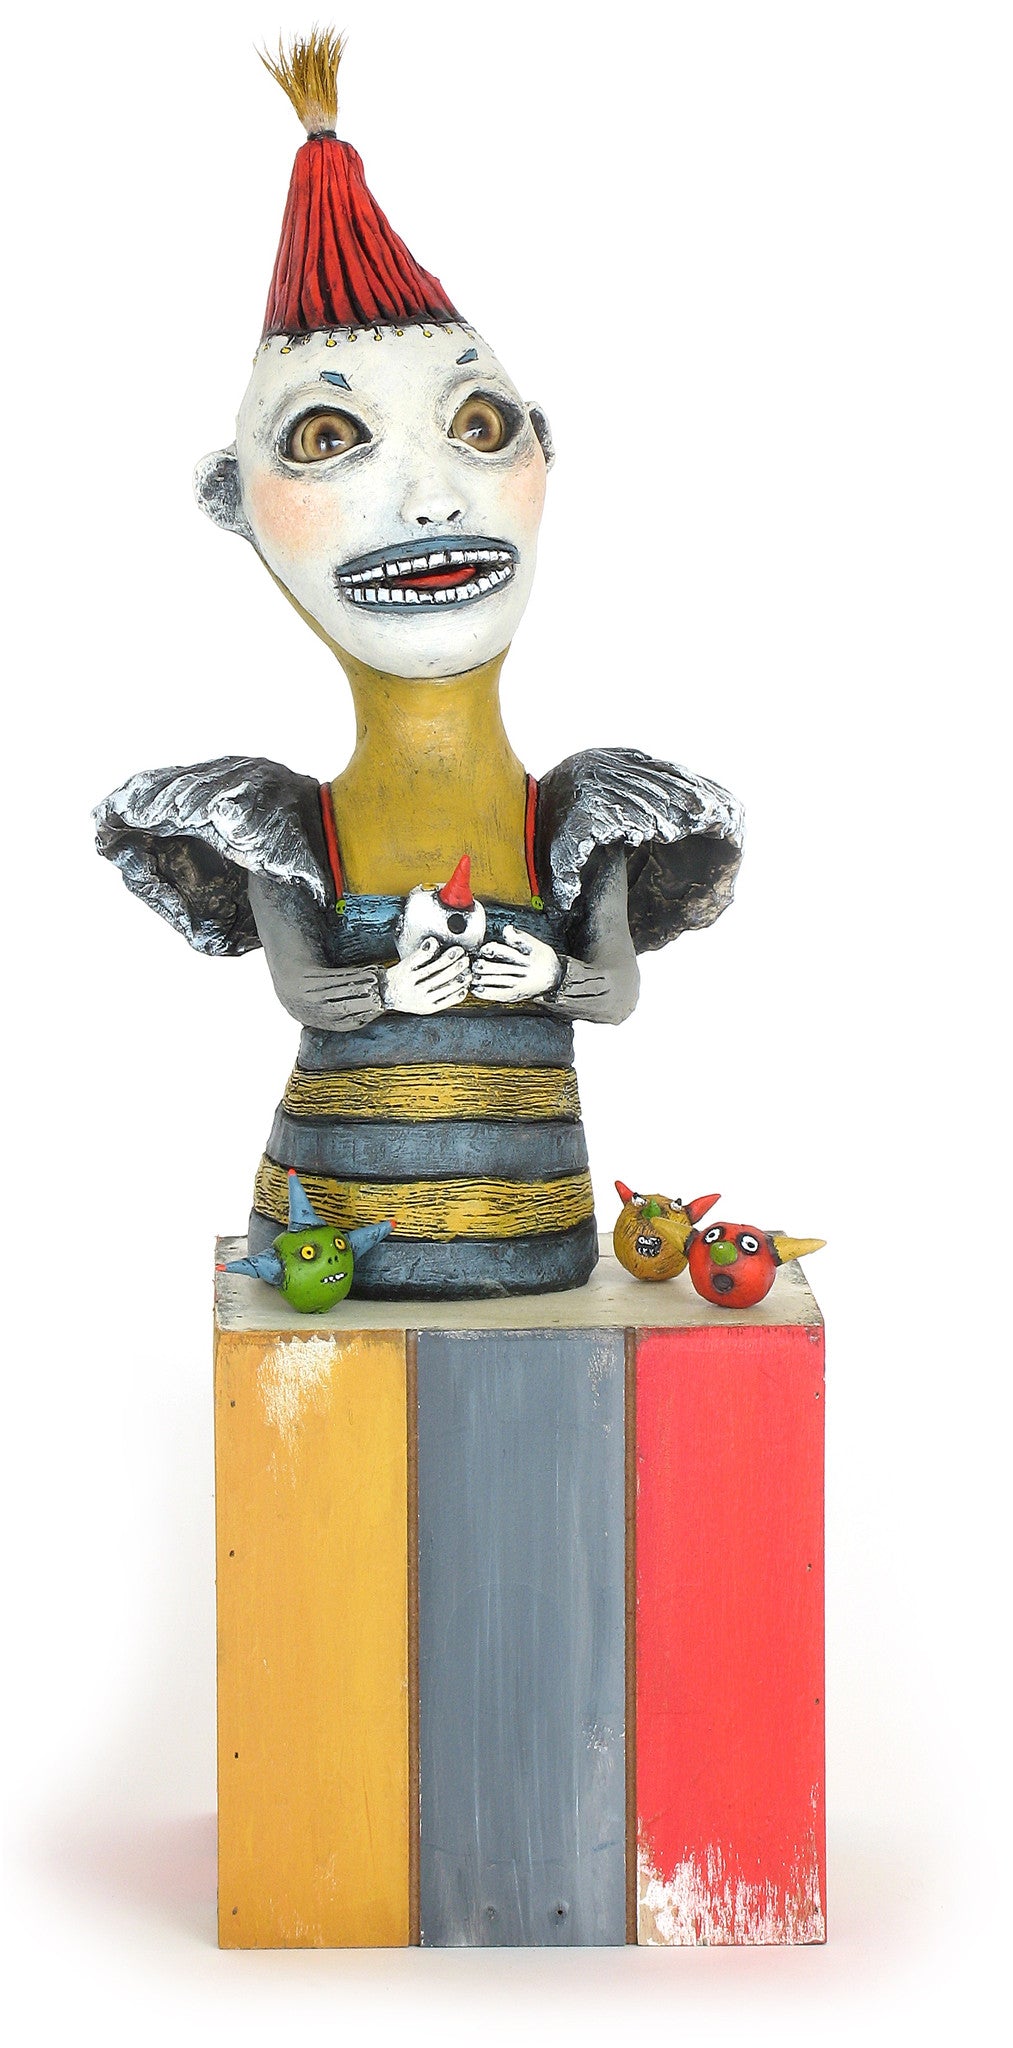 SOLD "Toying With Sanity" original ceramic sculpture by Jacquline Hurlbert